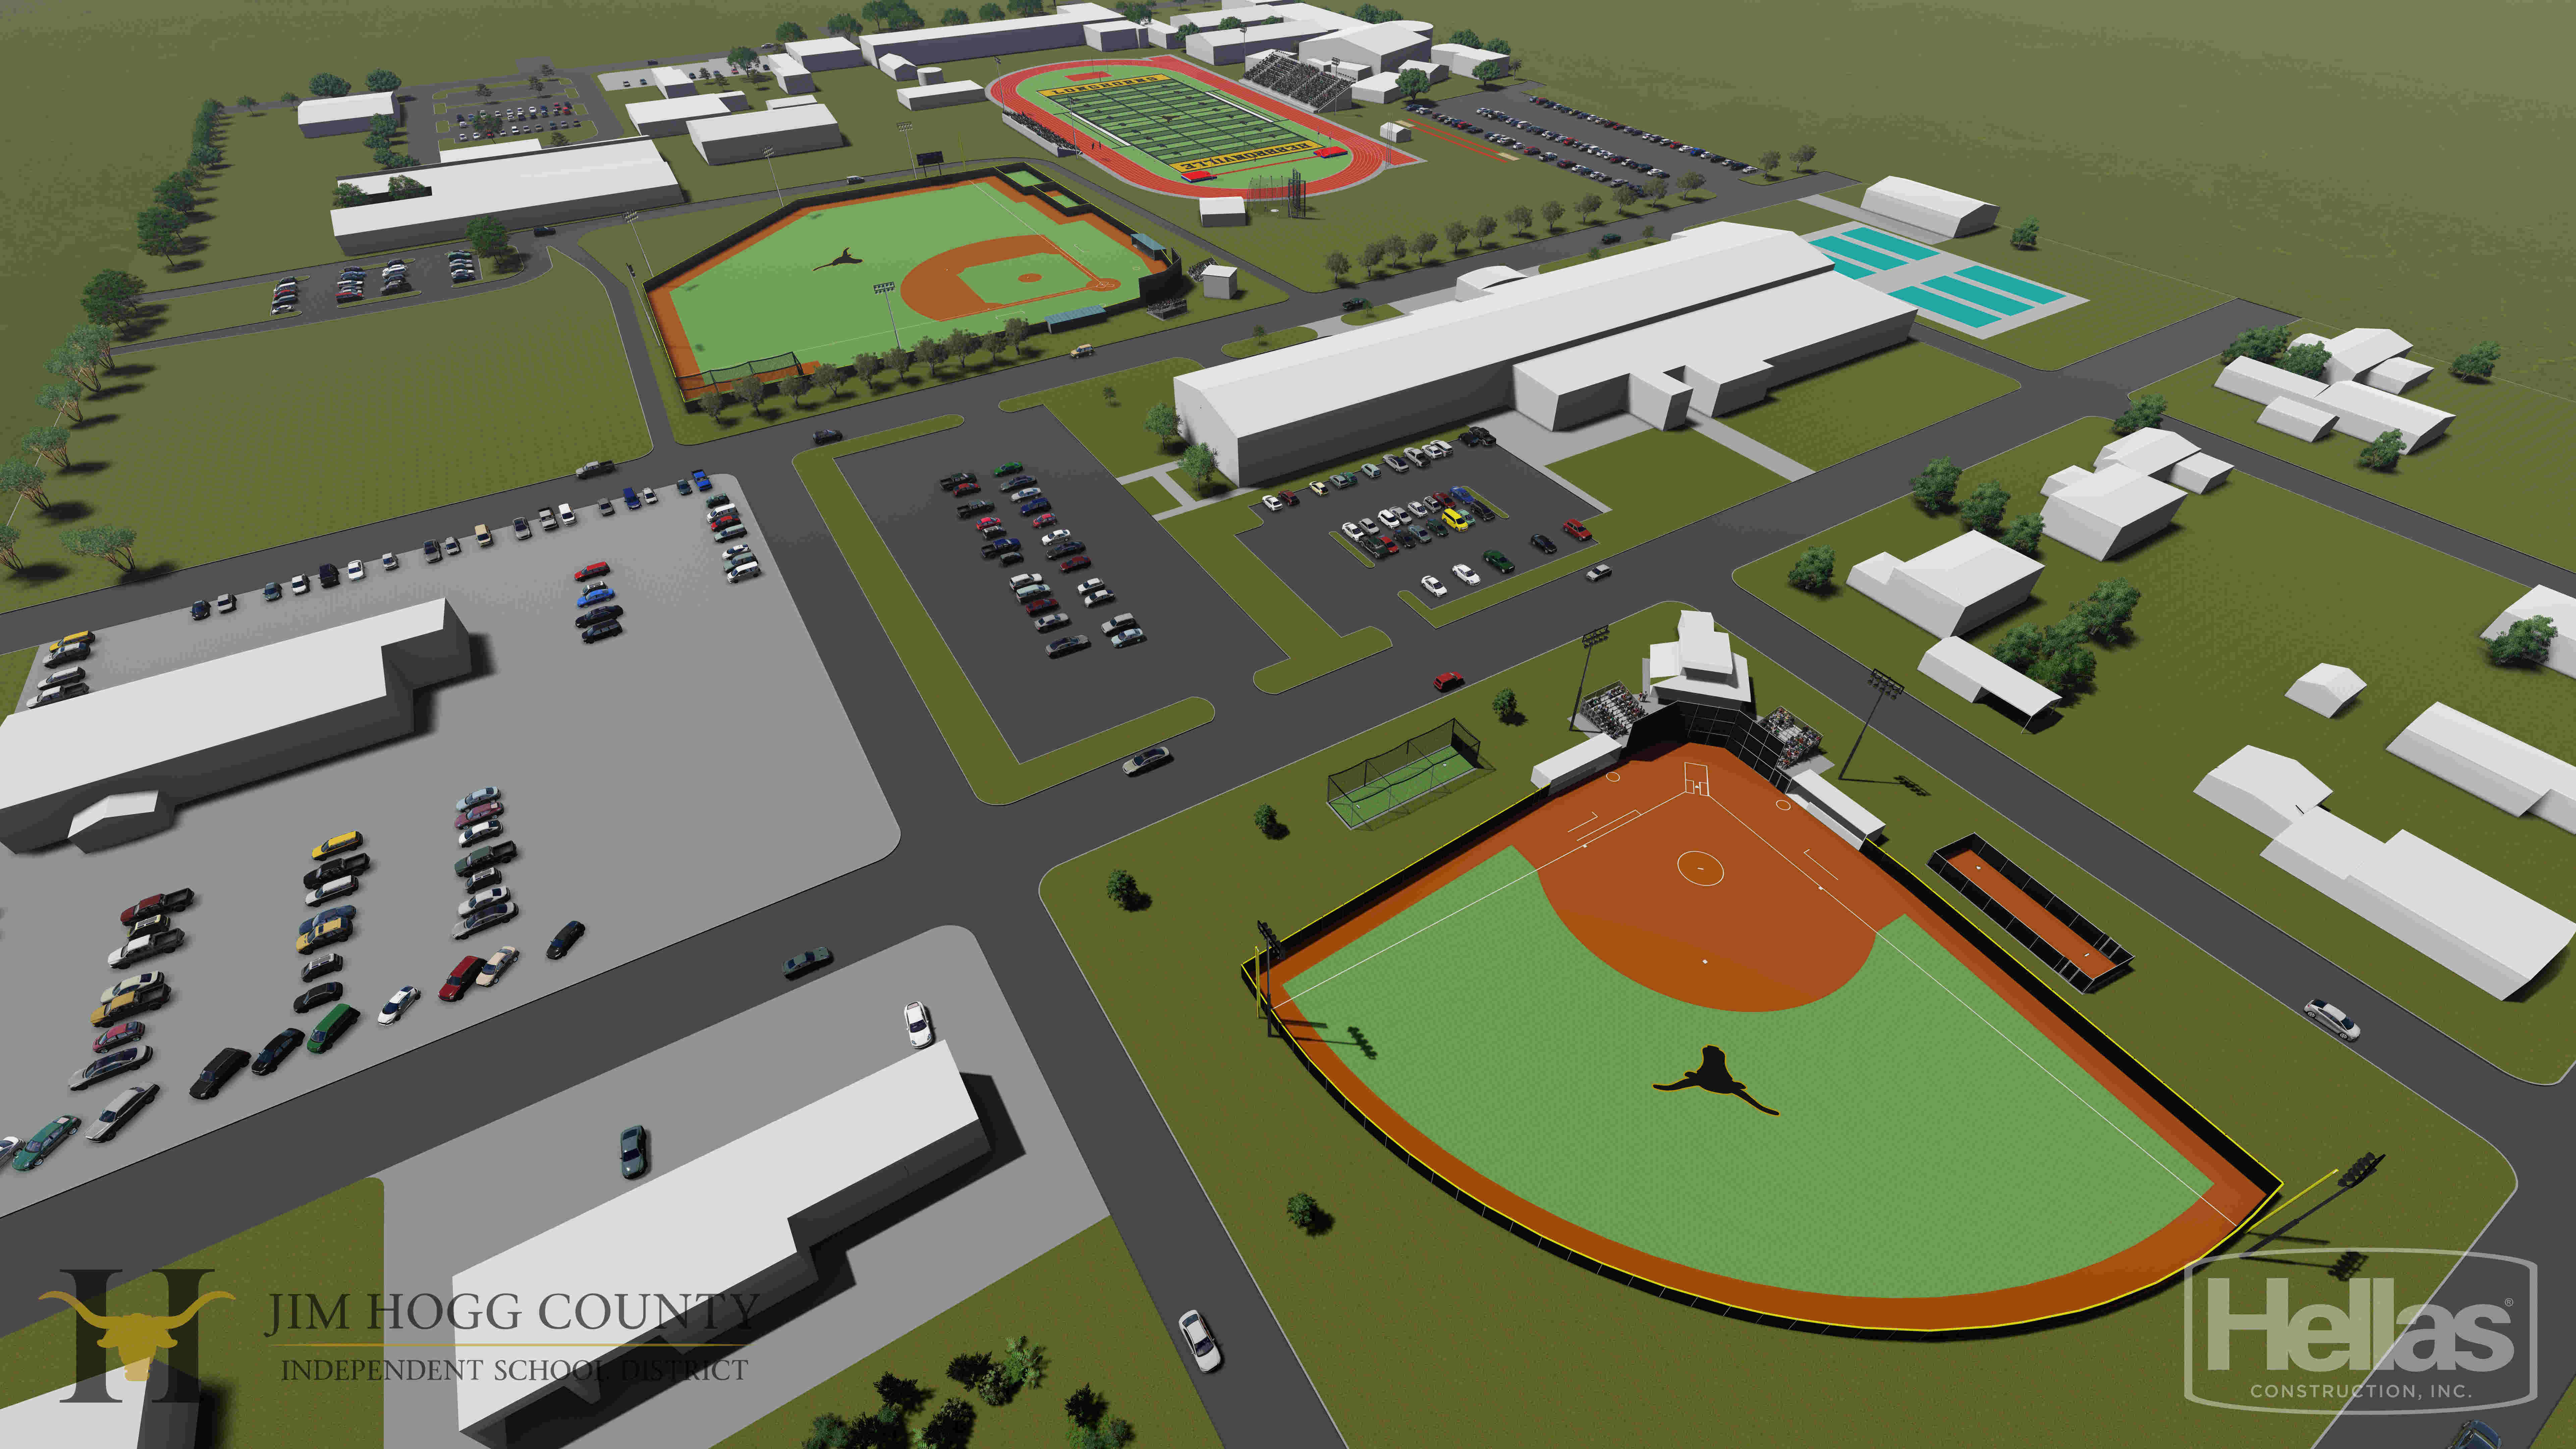 The Longhorns of Hebbronville High School are excited about new football, softball and baseball fields, plus a new track